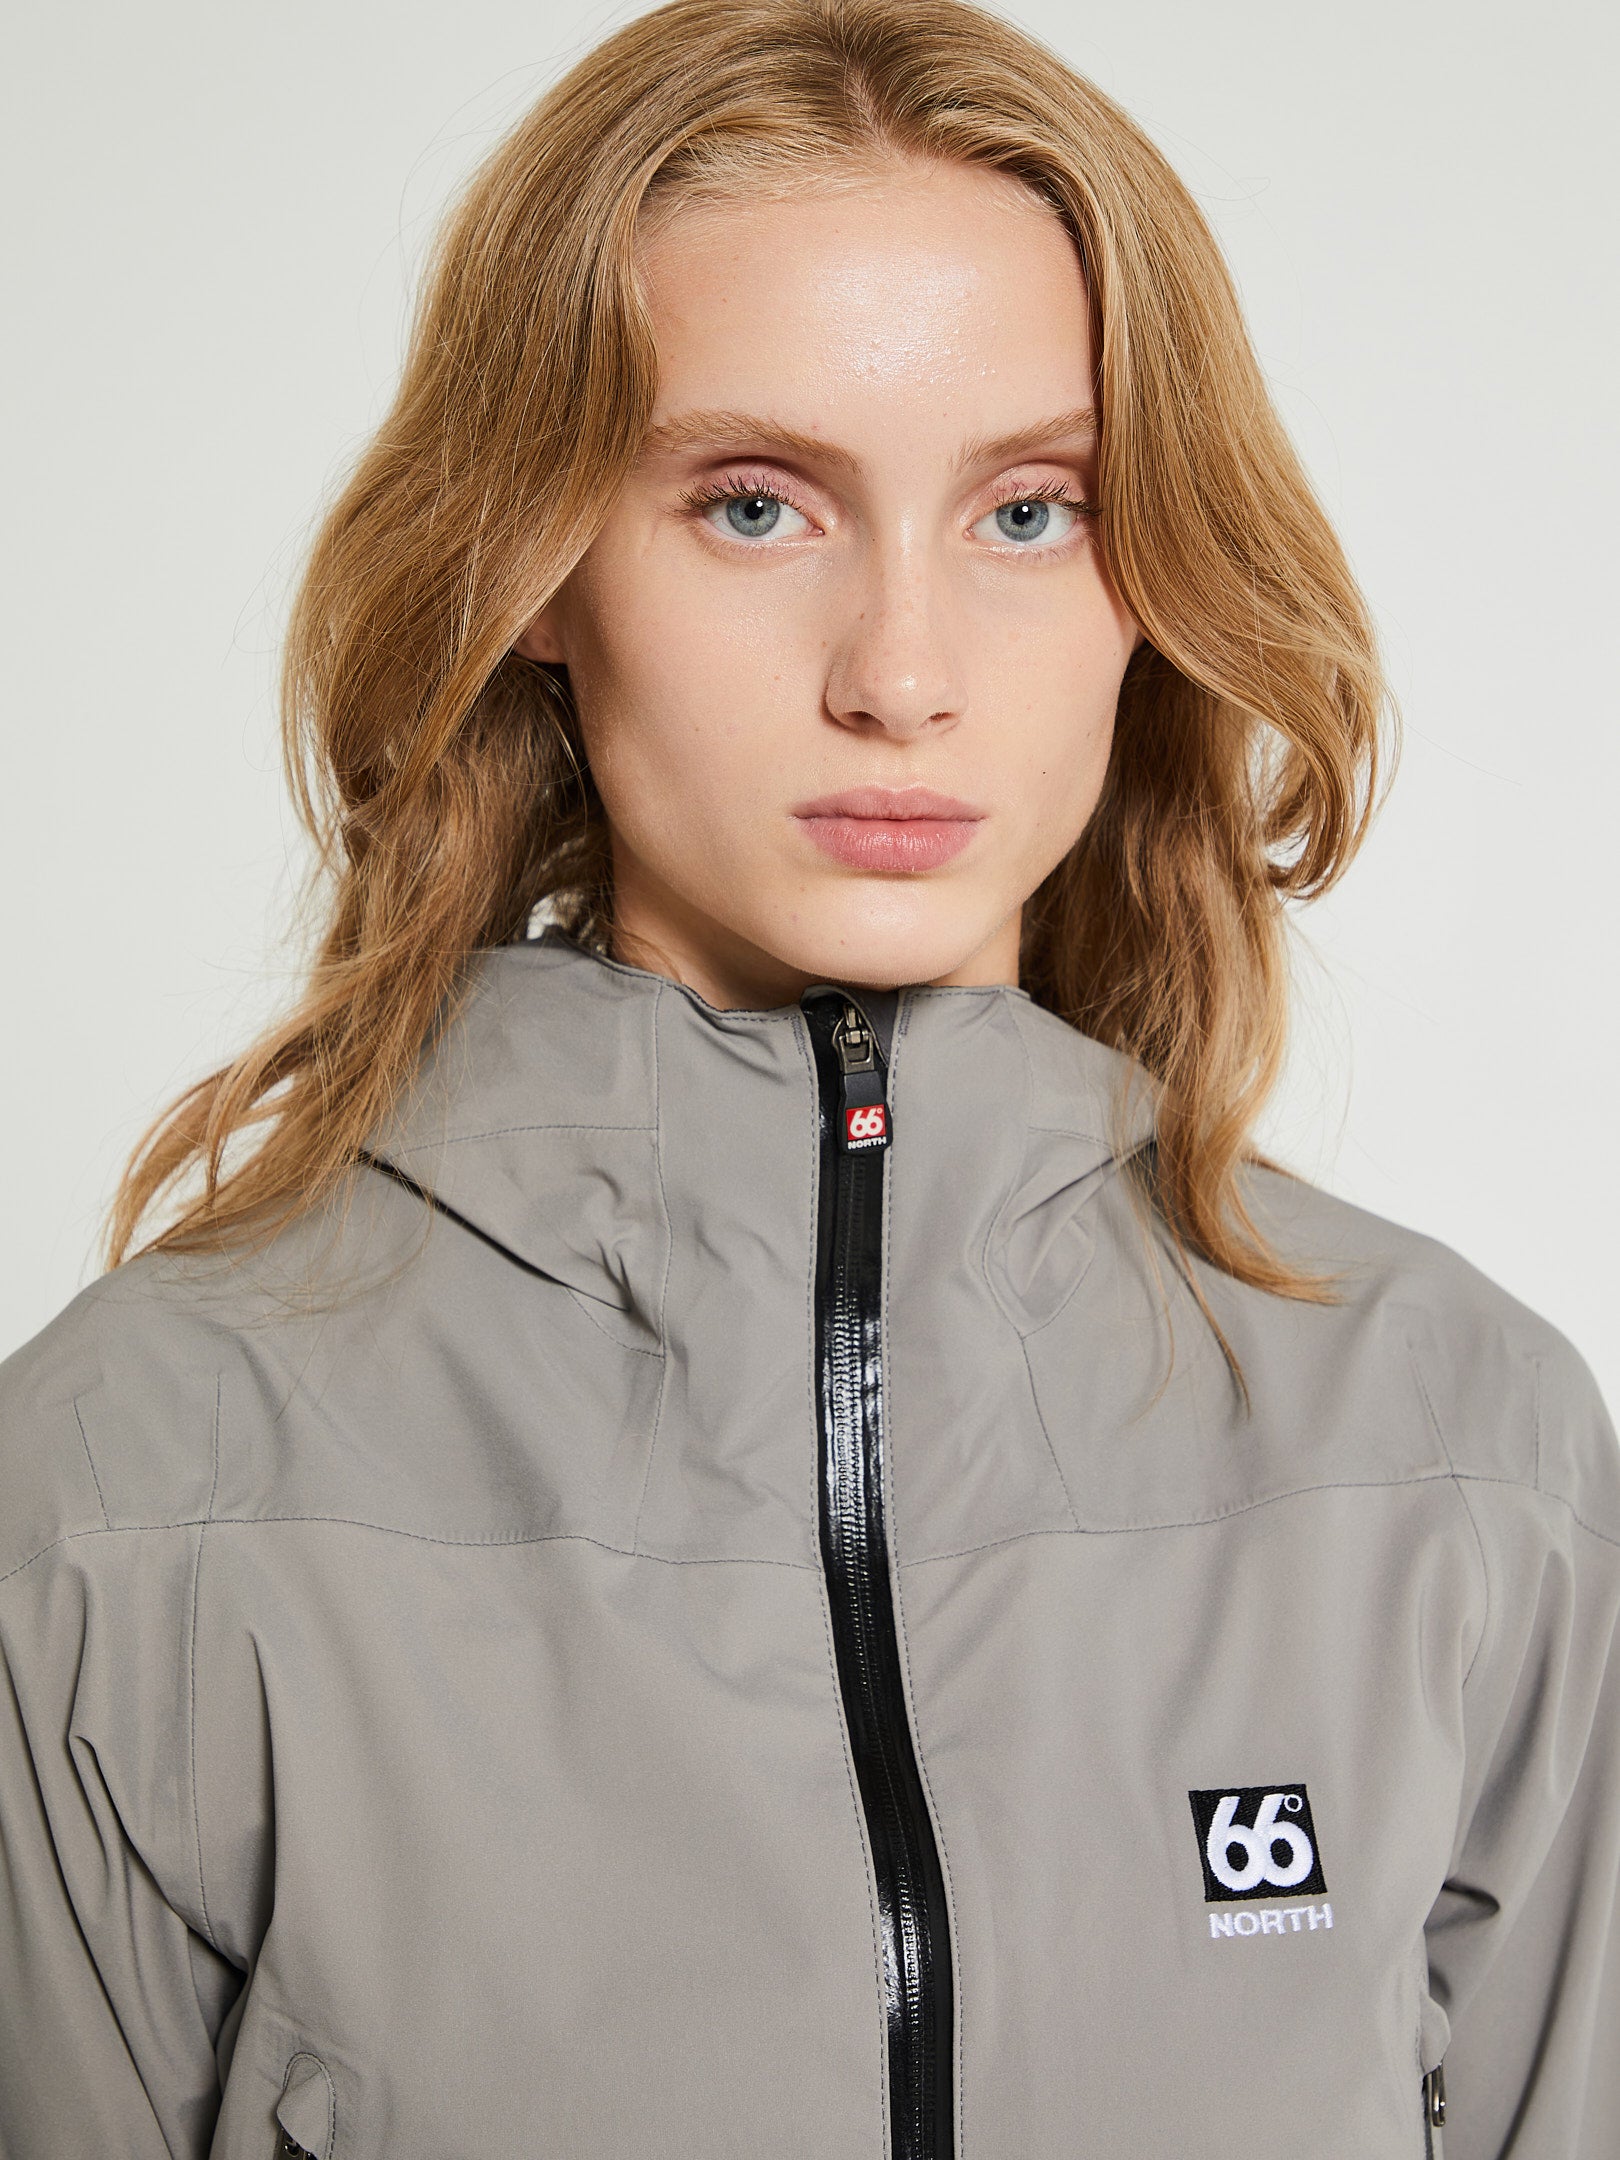 66 North - Snaefell W Cropped Neoshell Jacket in Solid Grey – stoy